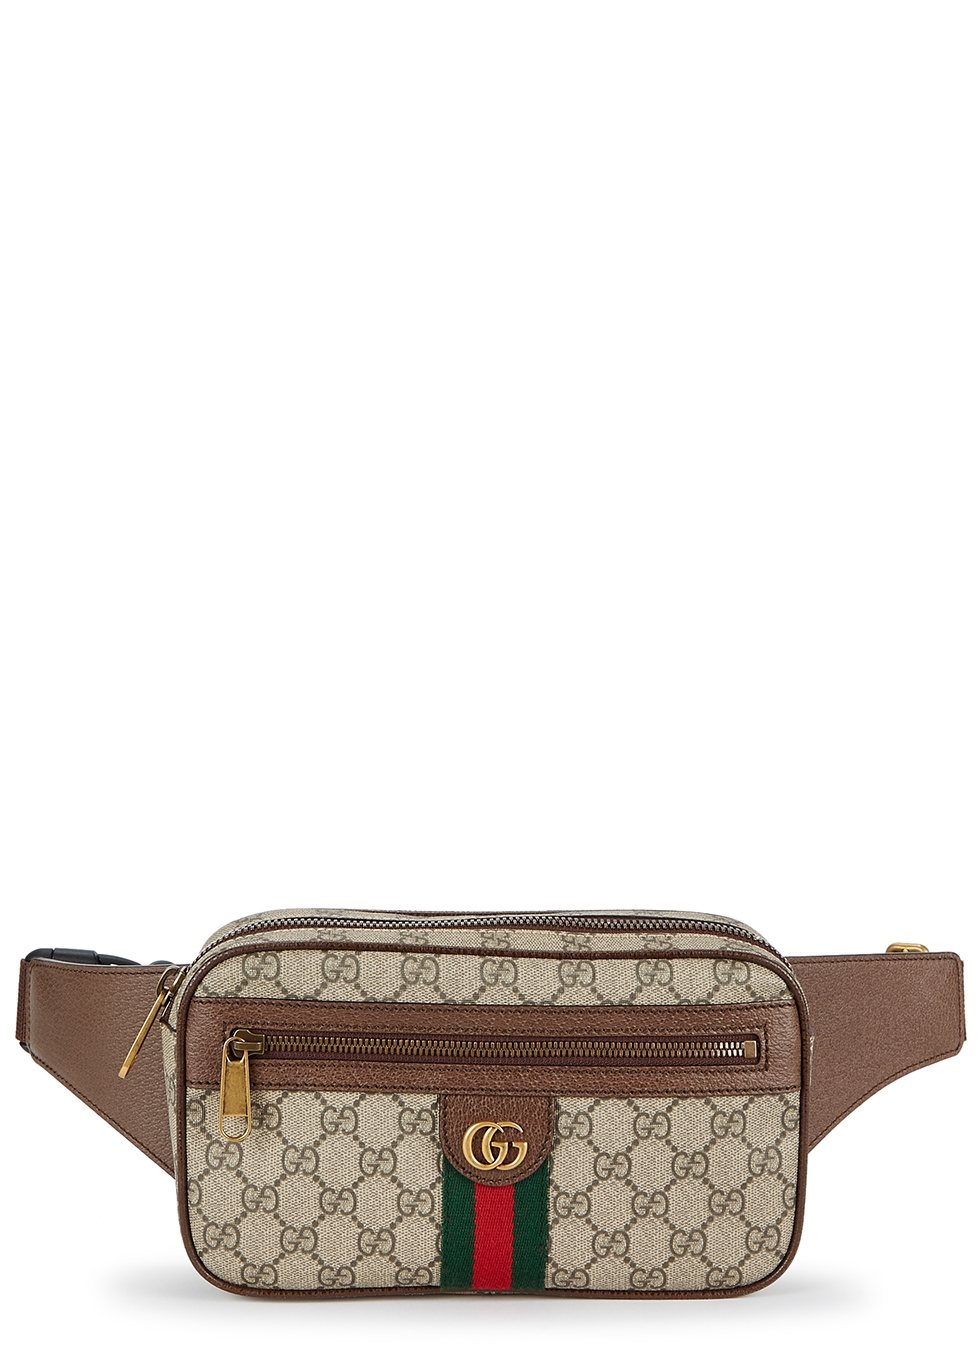 gucci bags and belts